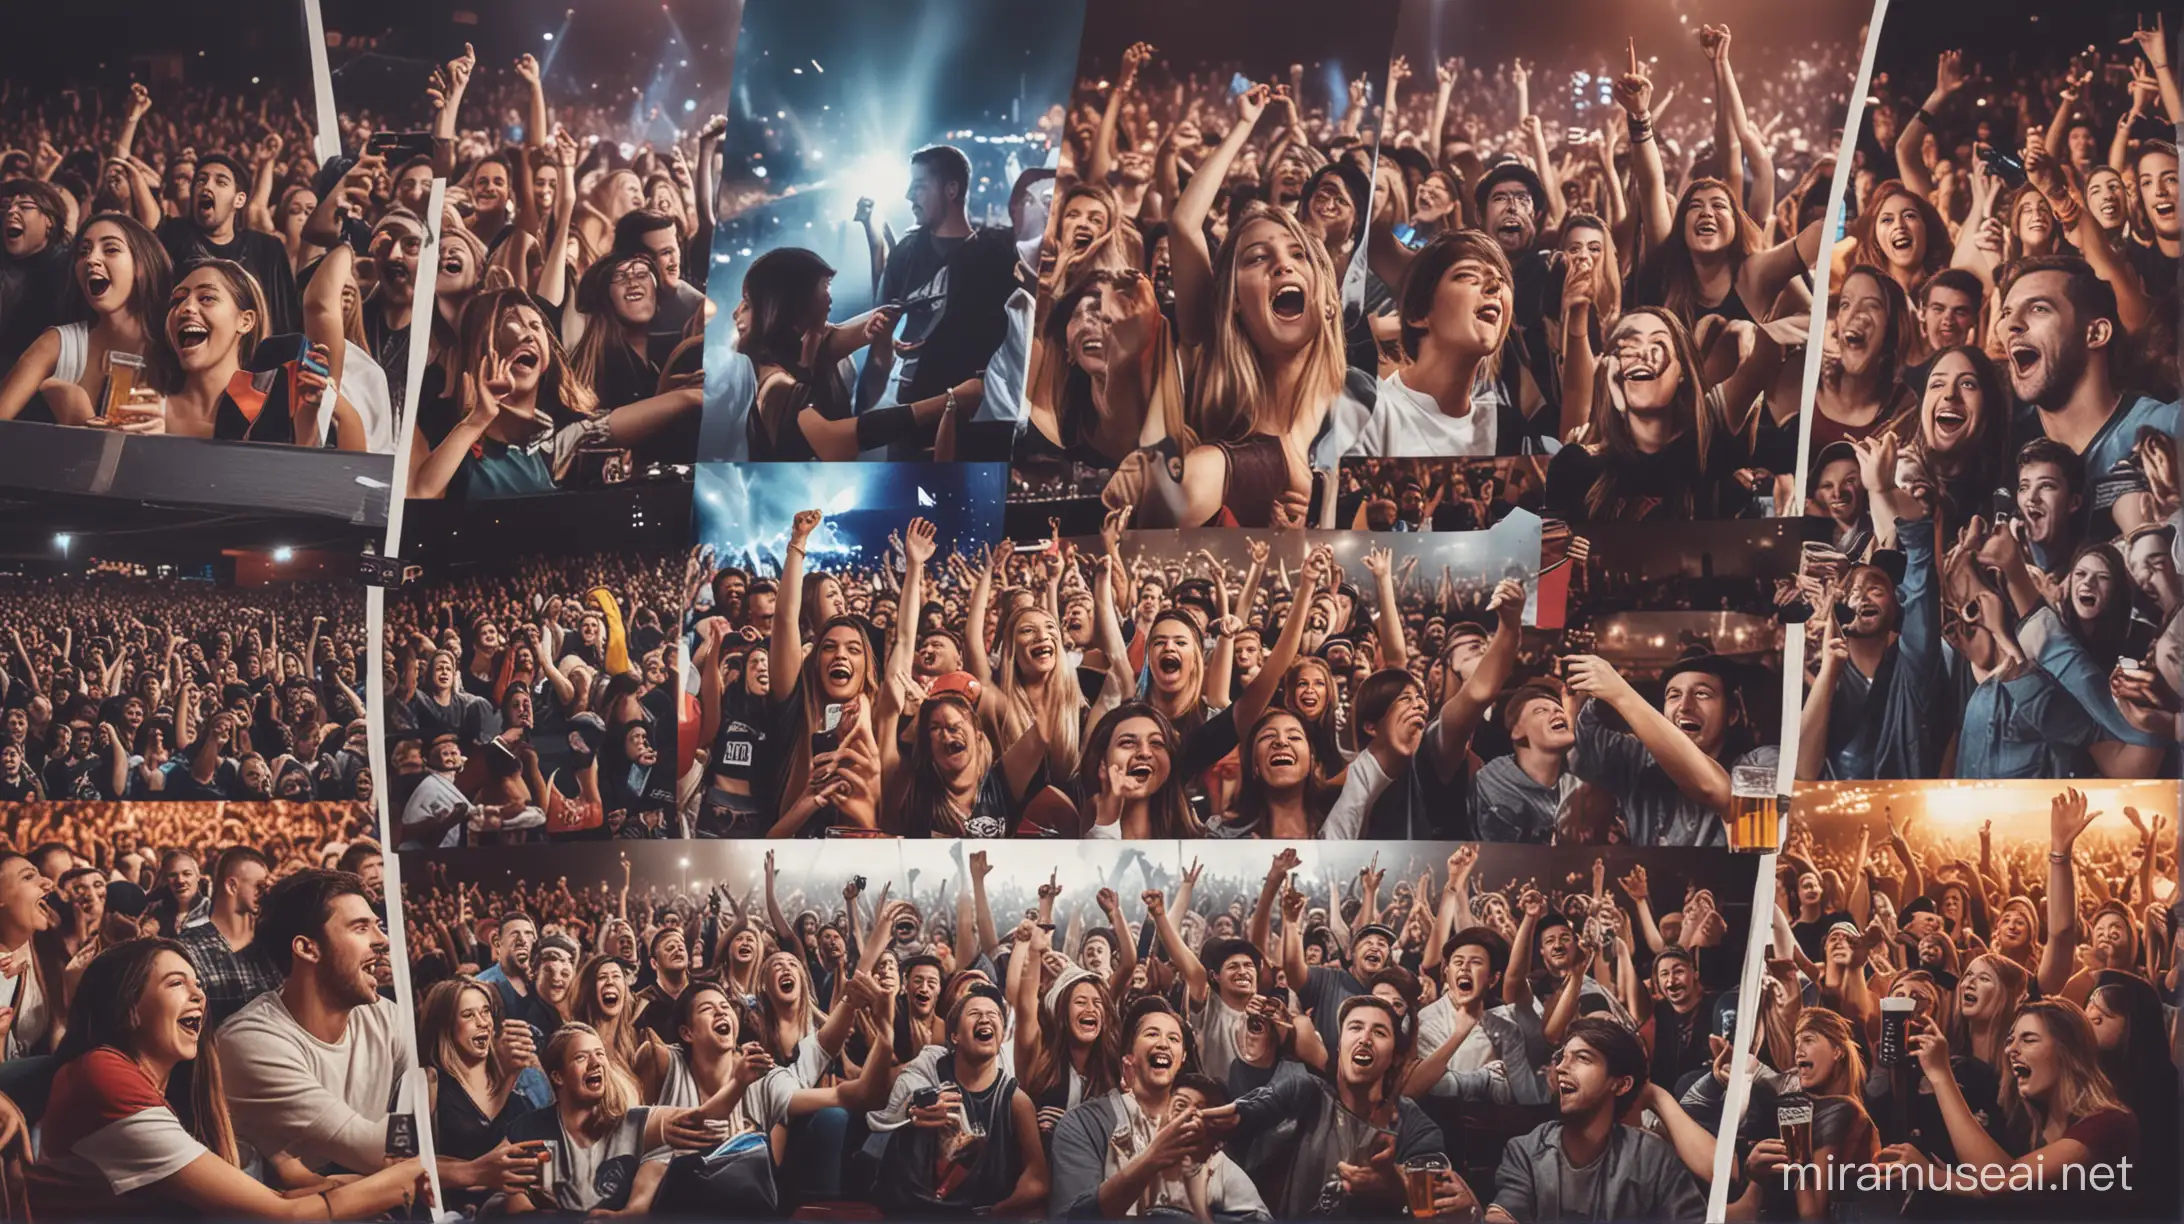 create a collage
 showing different groups of fans enjoying their passions - music fans watching a concert, sport fans watching a game, movie fans at a film premier, game fans watching or playing esports etc. 